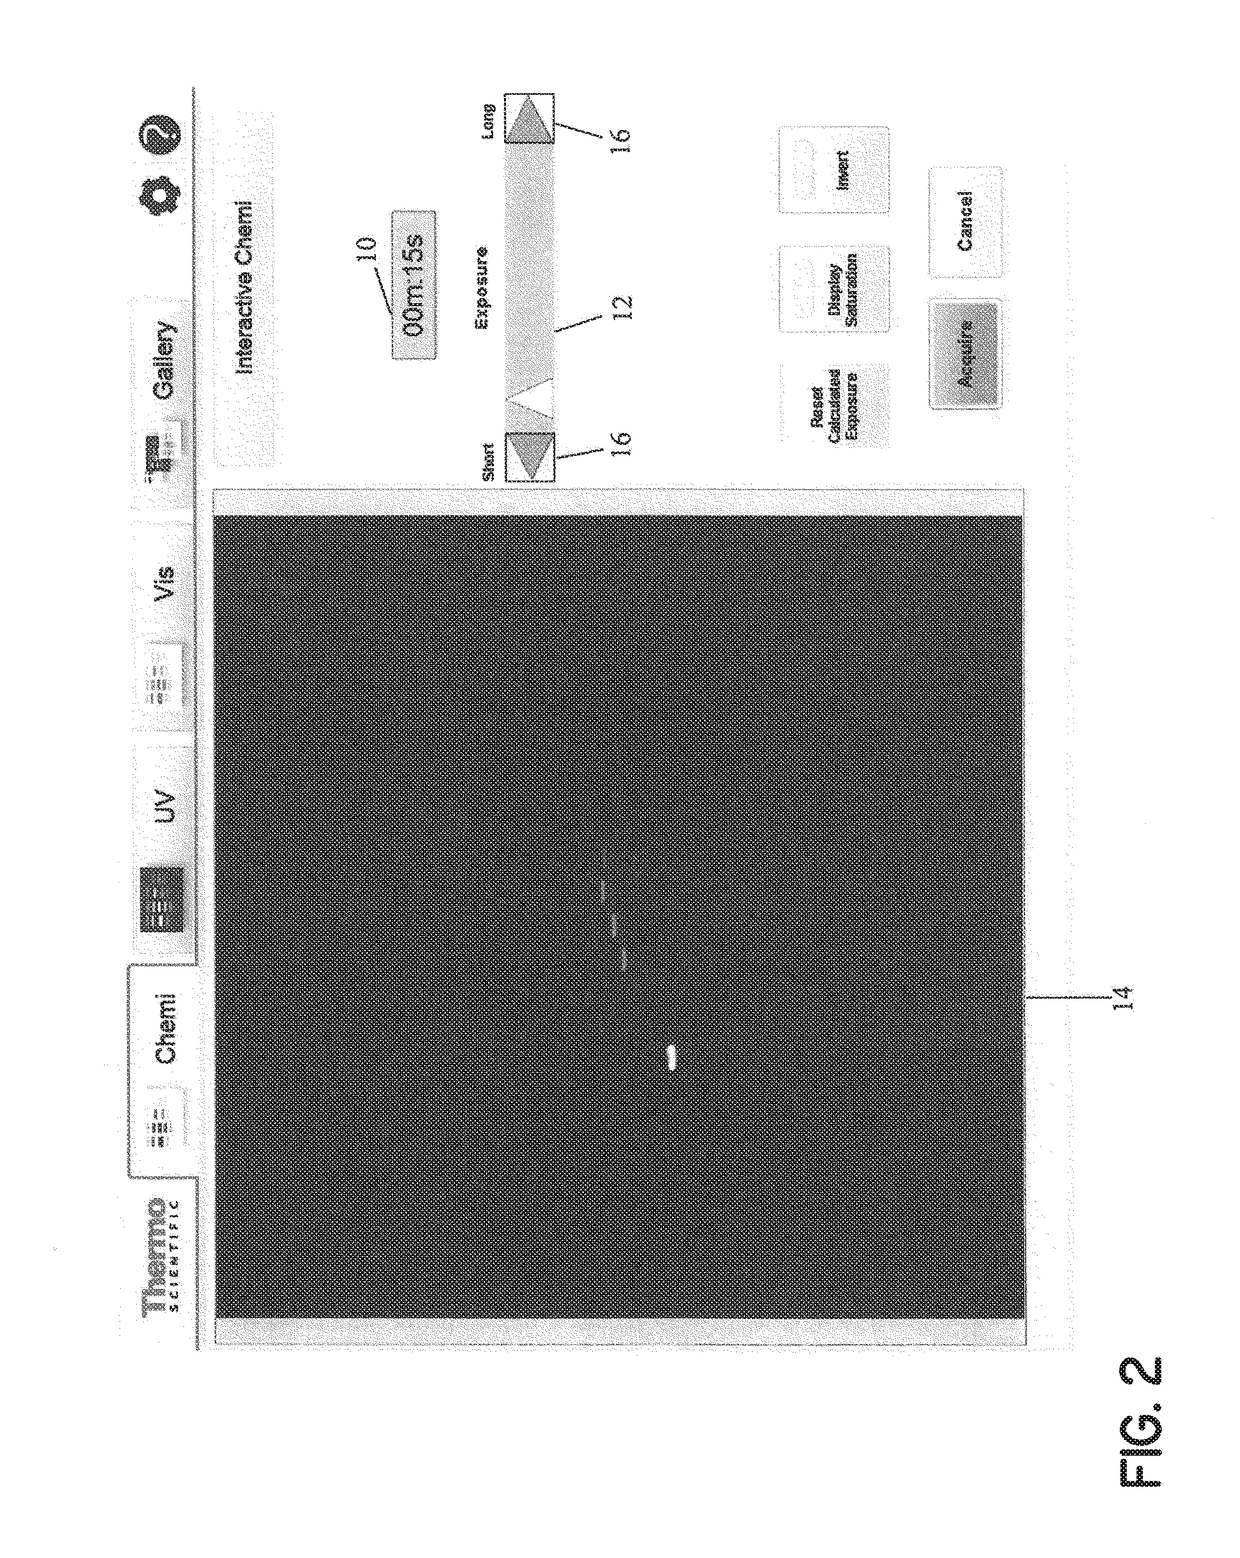 Method and system for projecting image with differing exposure times